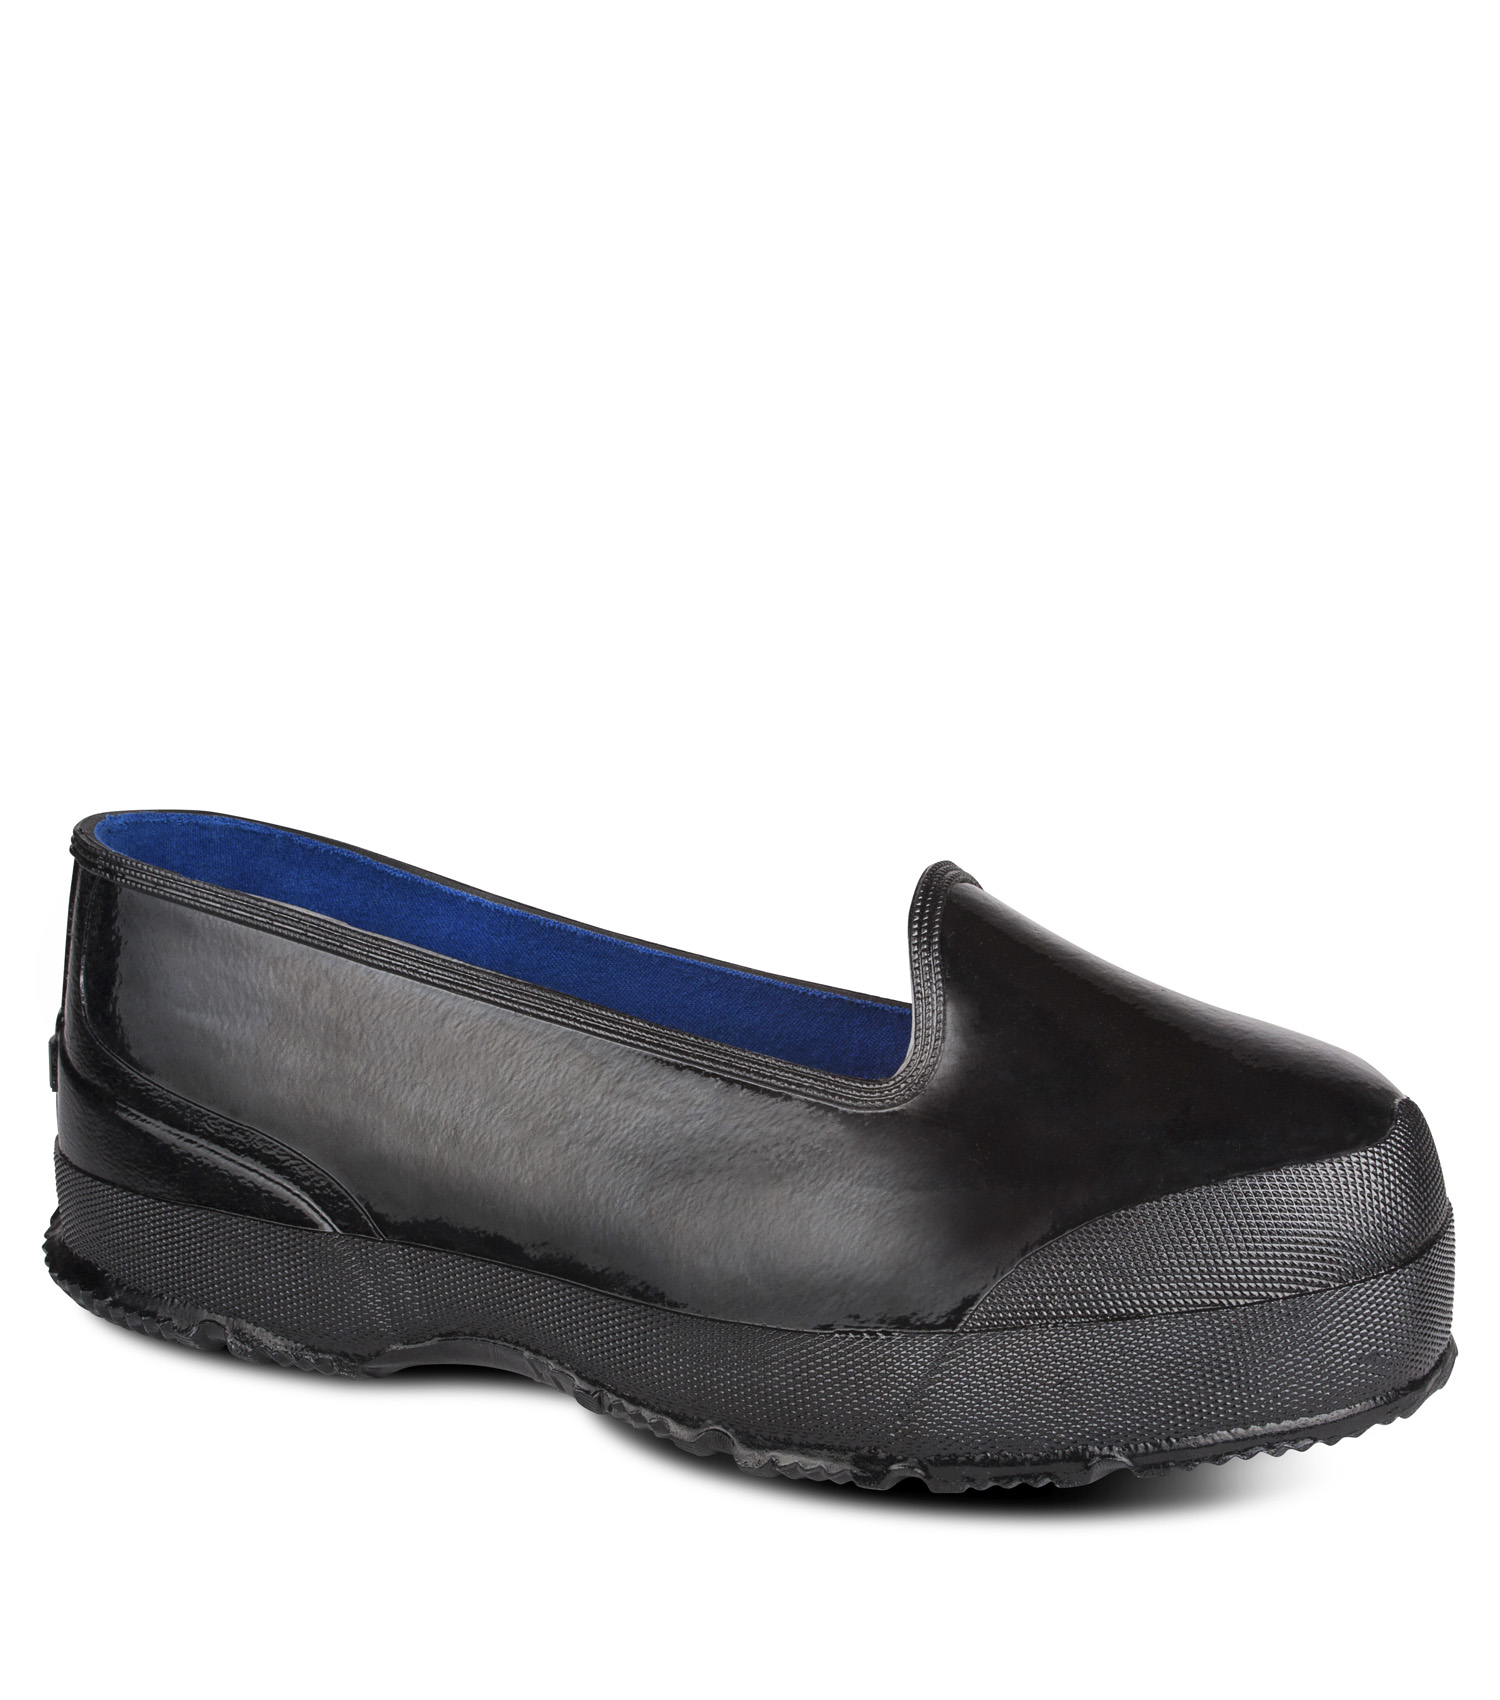 Acton Robson overshoes